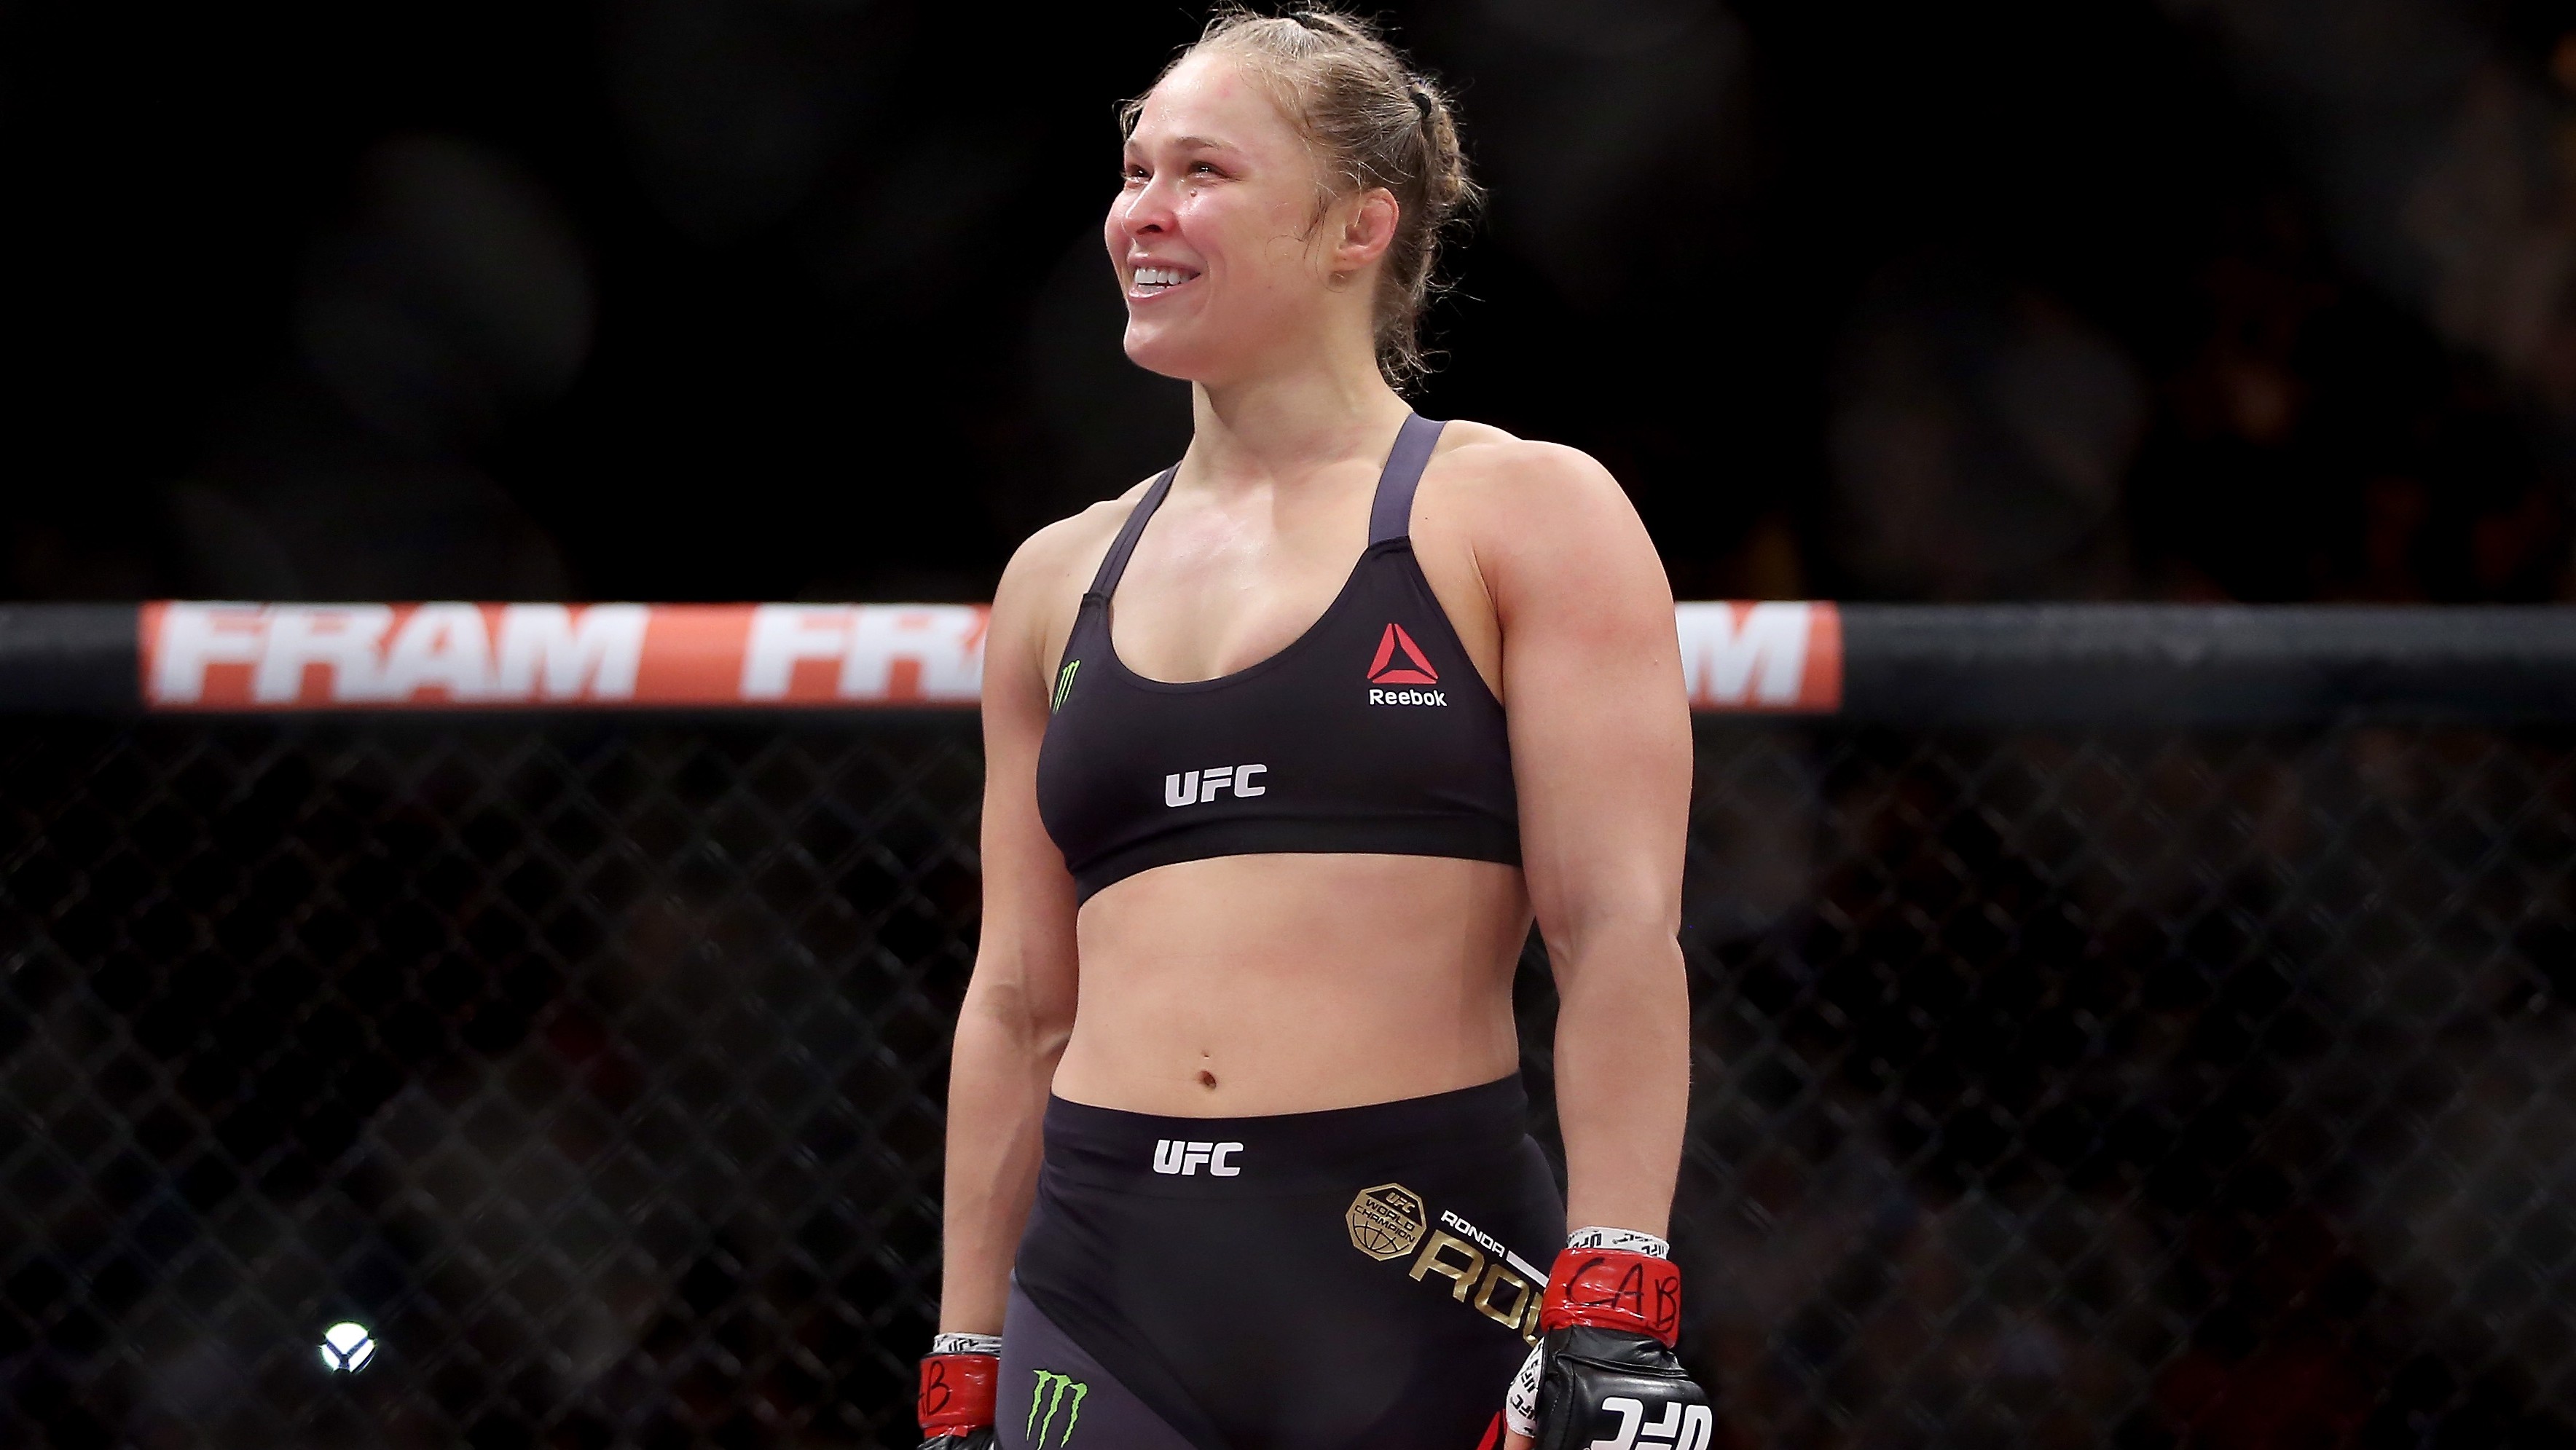 Who Is Ronda Rousey's Next Fight Against?